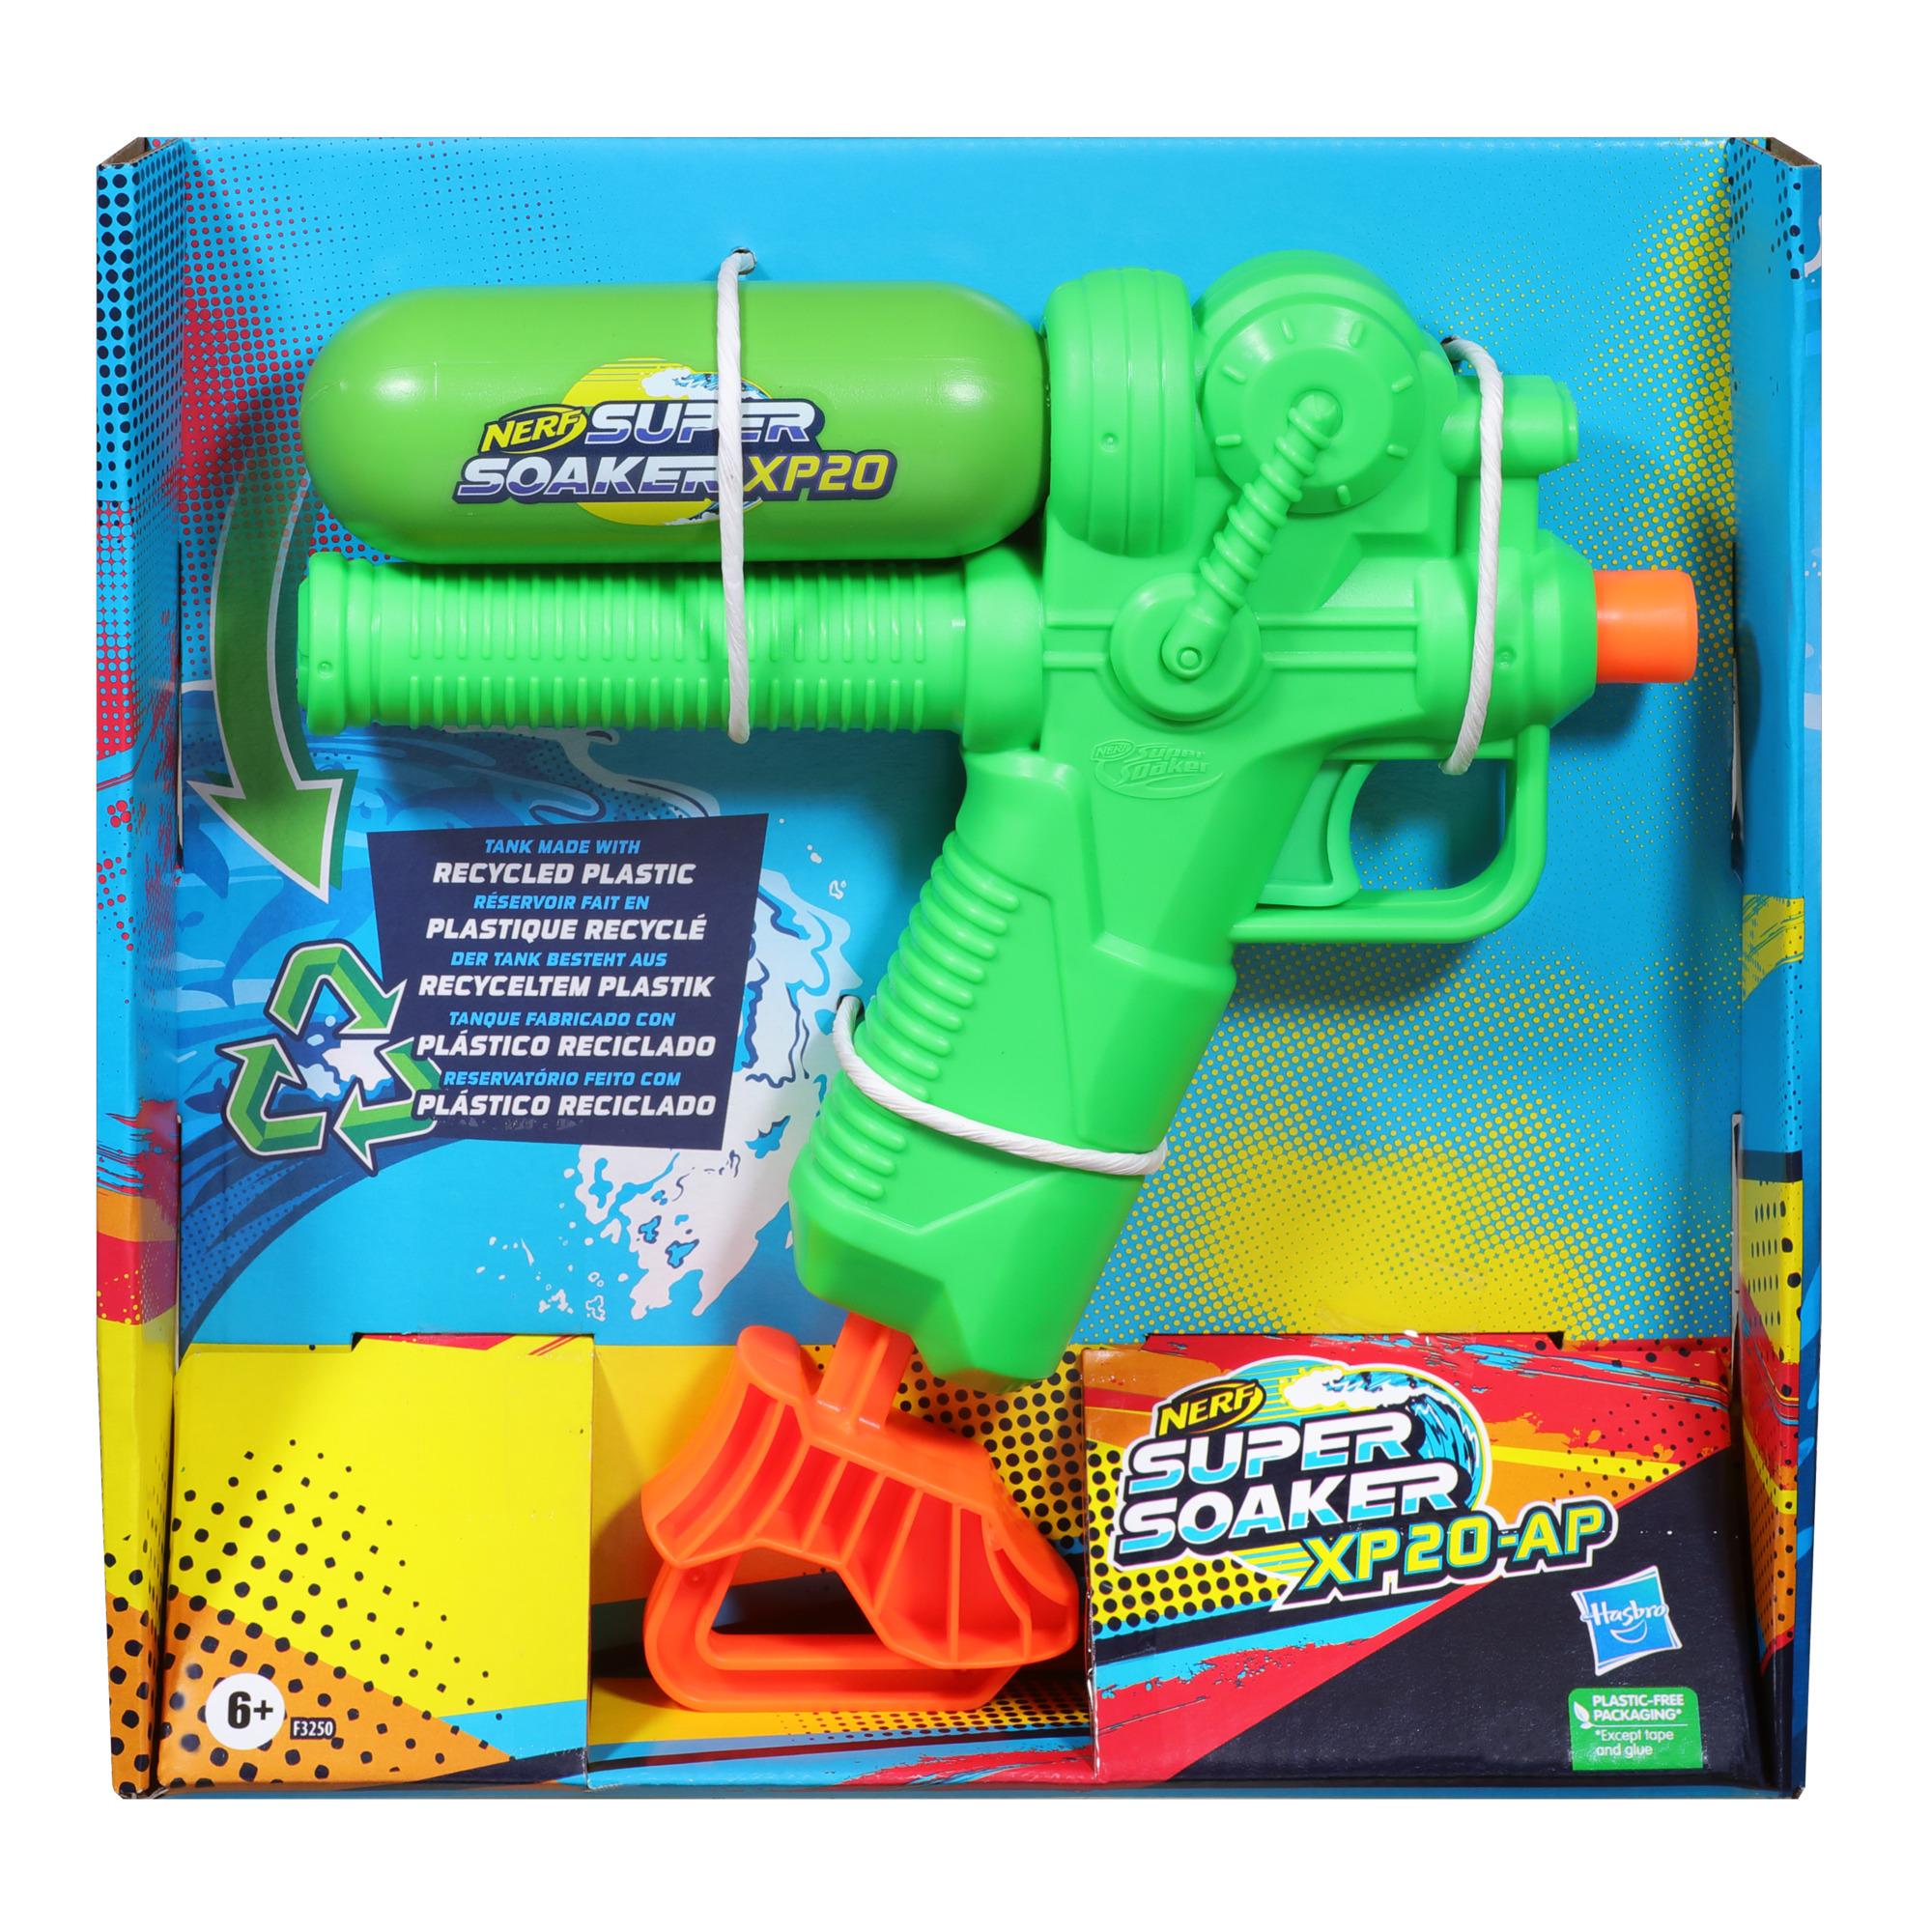 Nerf Super Soaker XP20-AP Water Blaster, Tank Made With Recycled Plastic, Air-Pressurized Continuous Water Blast